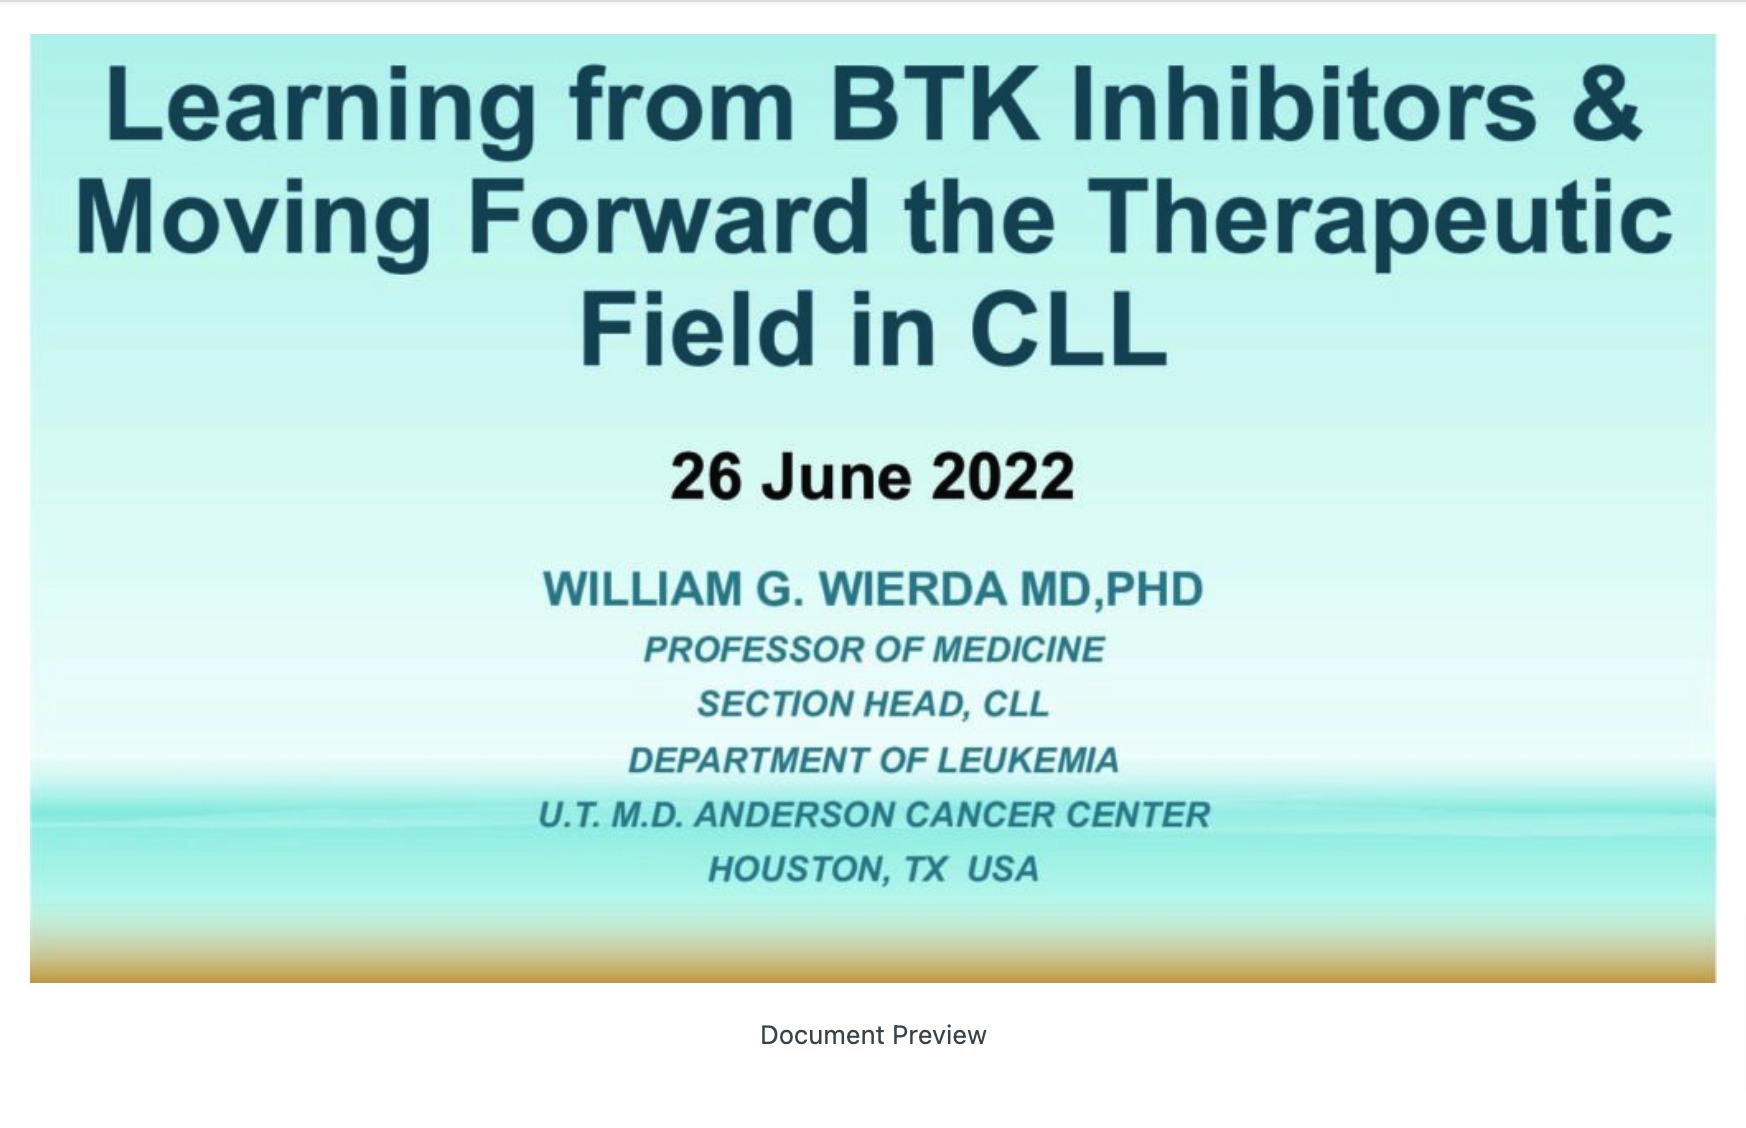 Learning from BTK Inhibitors & Moving Forward the Therapeutic Field in CLL